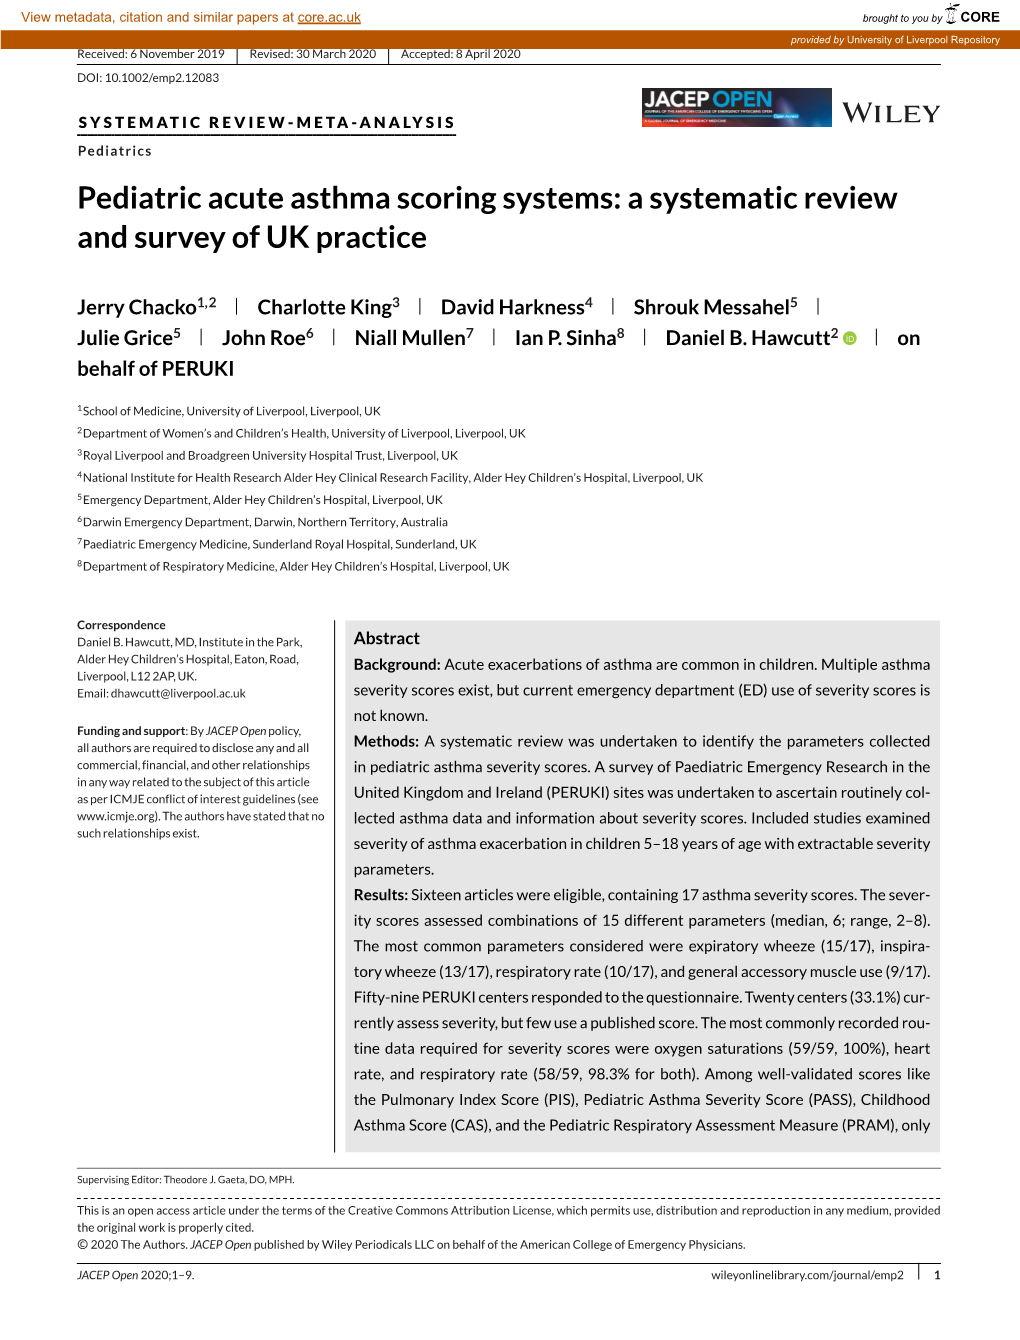 Pediatric Acute Asthma Scoring Systems: a Systematic Review and Survey of UK Practice